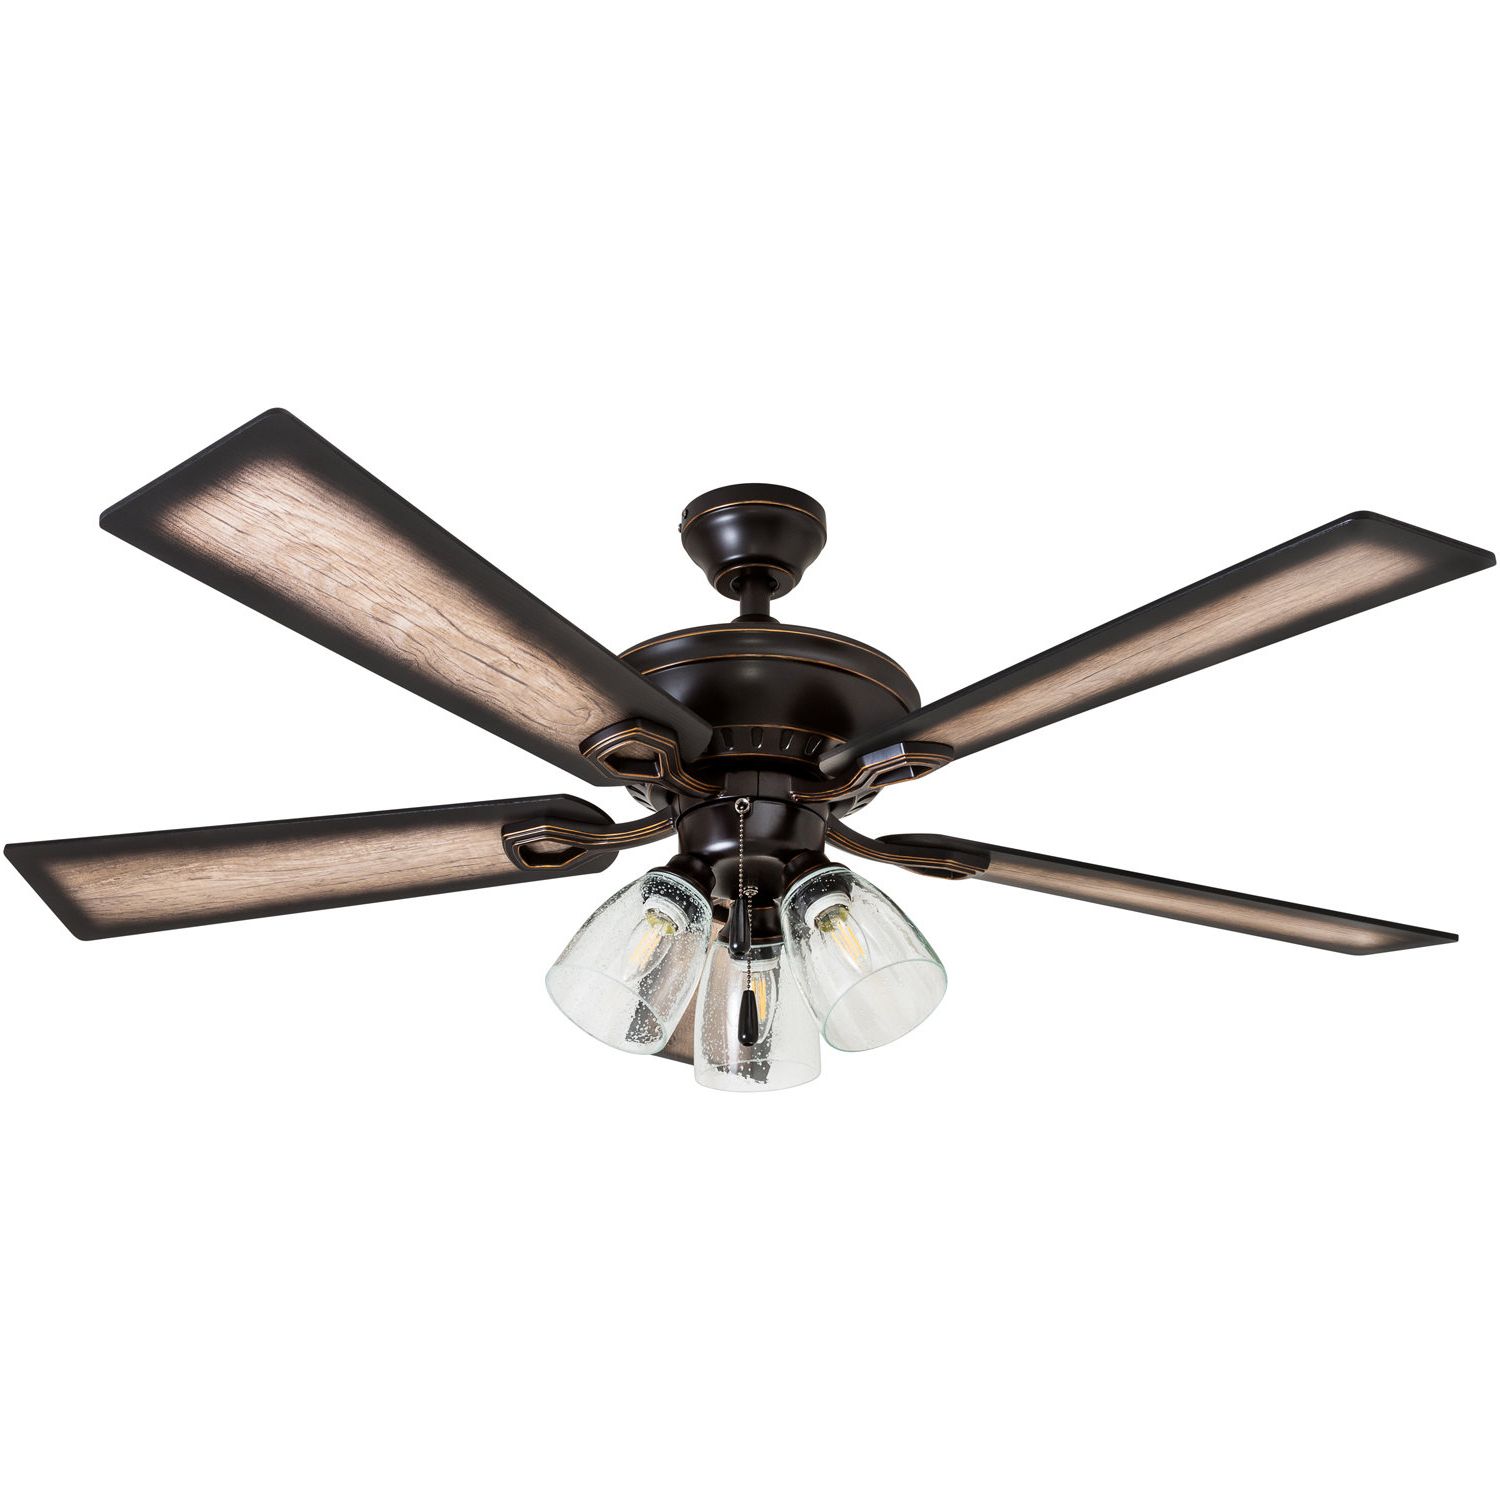 Donegan 5 Blade Ceiling Fans Regarding Most Current 52" O'hanlon 5 Blade Led Ceiling Fan, Light Kit Included (View 17 of 20)